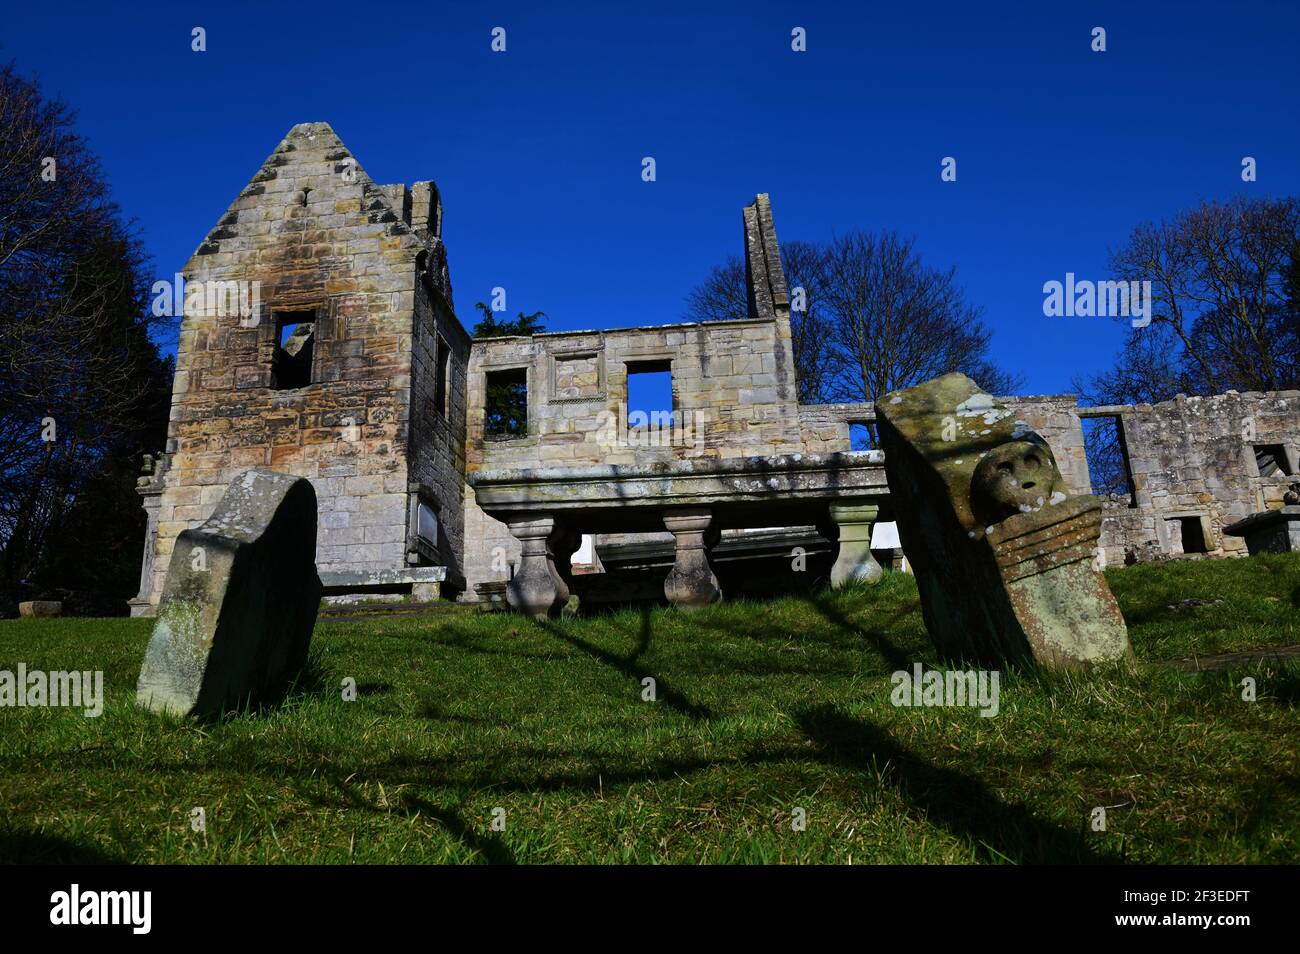 A view of the ruins of the medieval stone church building of St. Bridgets on the shoreline at Dalgety Bay in Fife. Stock Photo